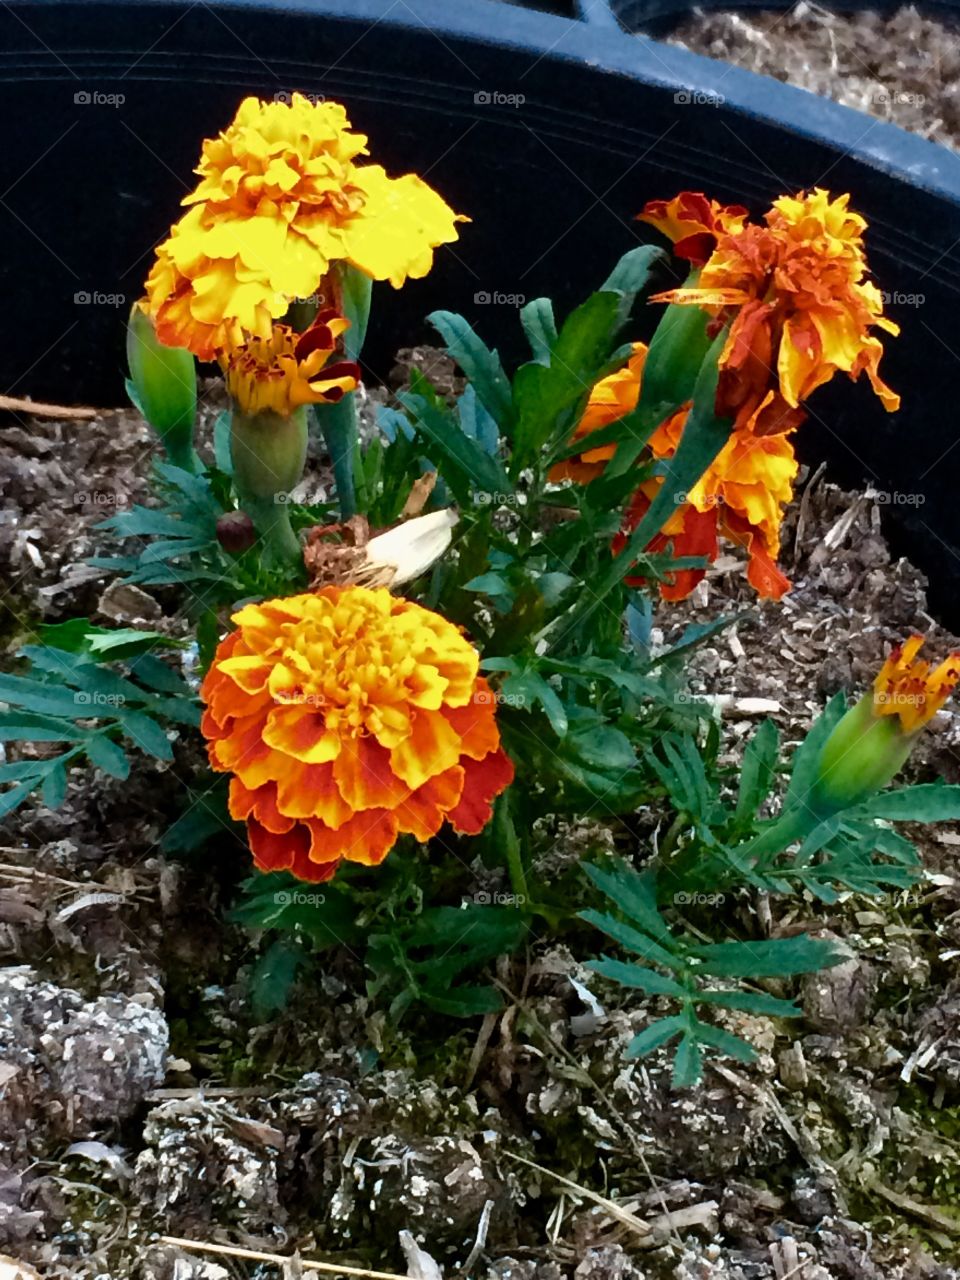 Lonely little orange potted flowers.